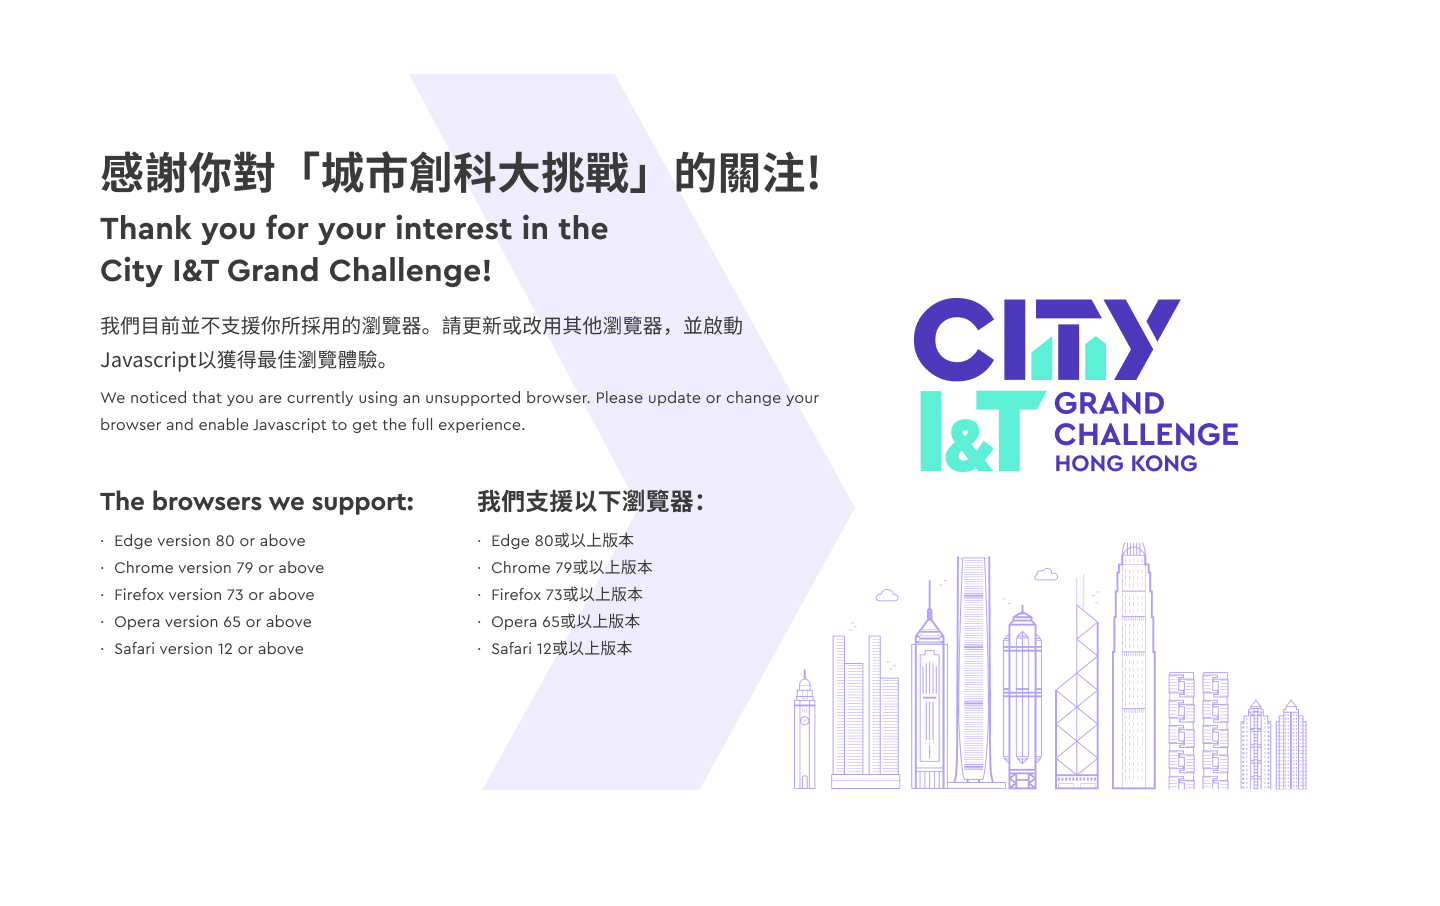 Thank you for your interest in the City I&T Grand Challenge!